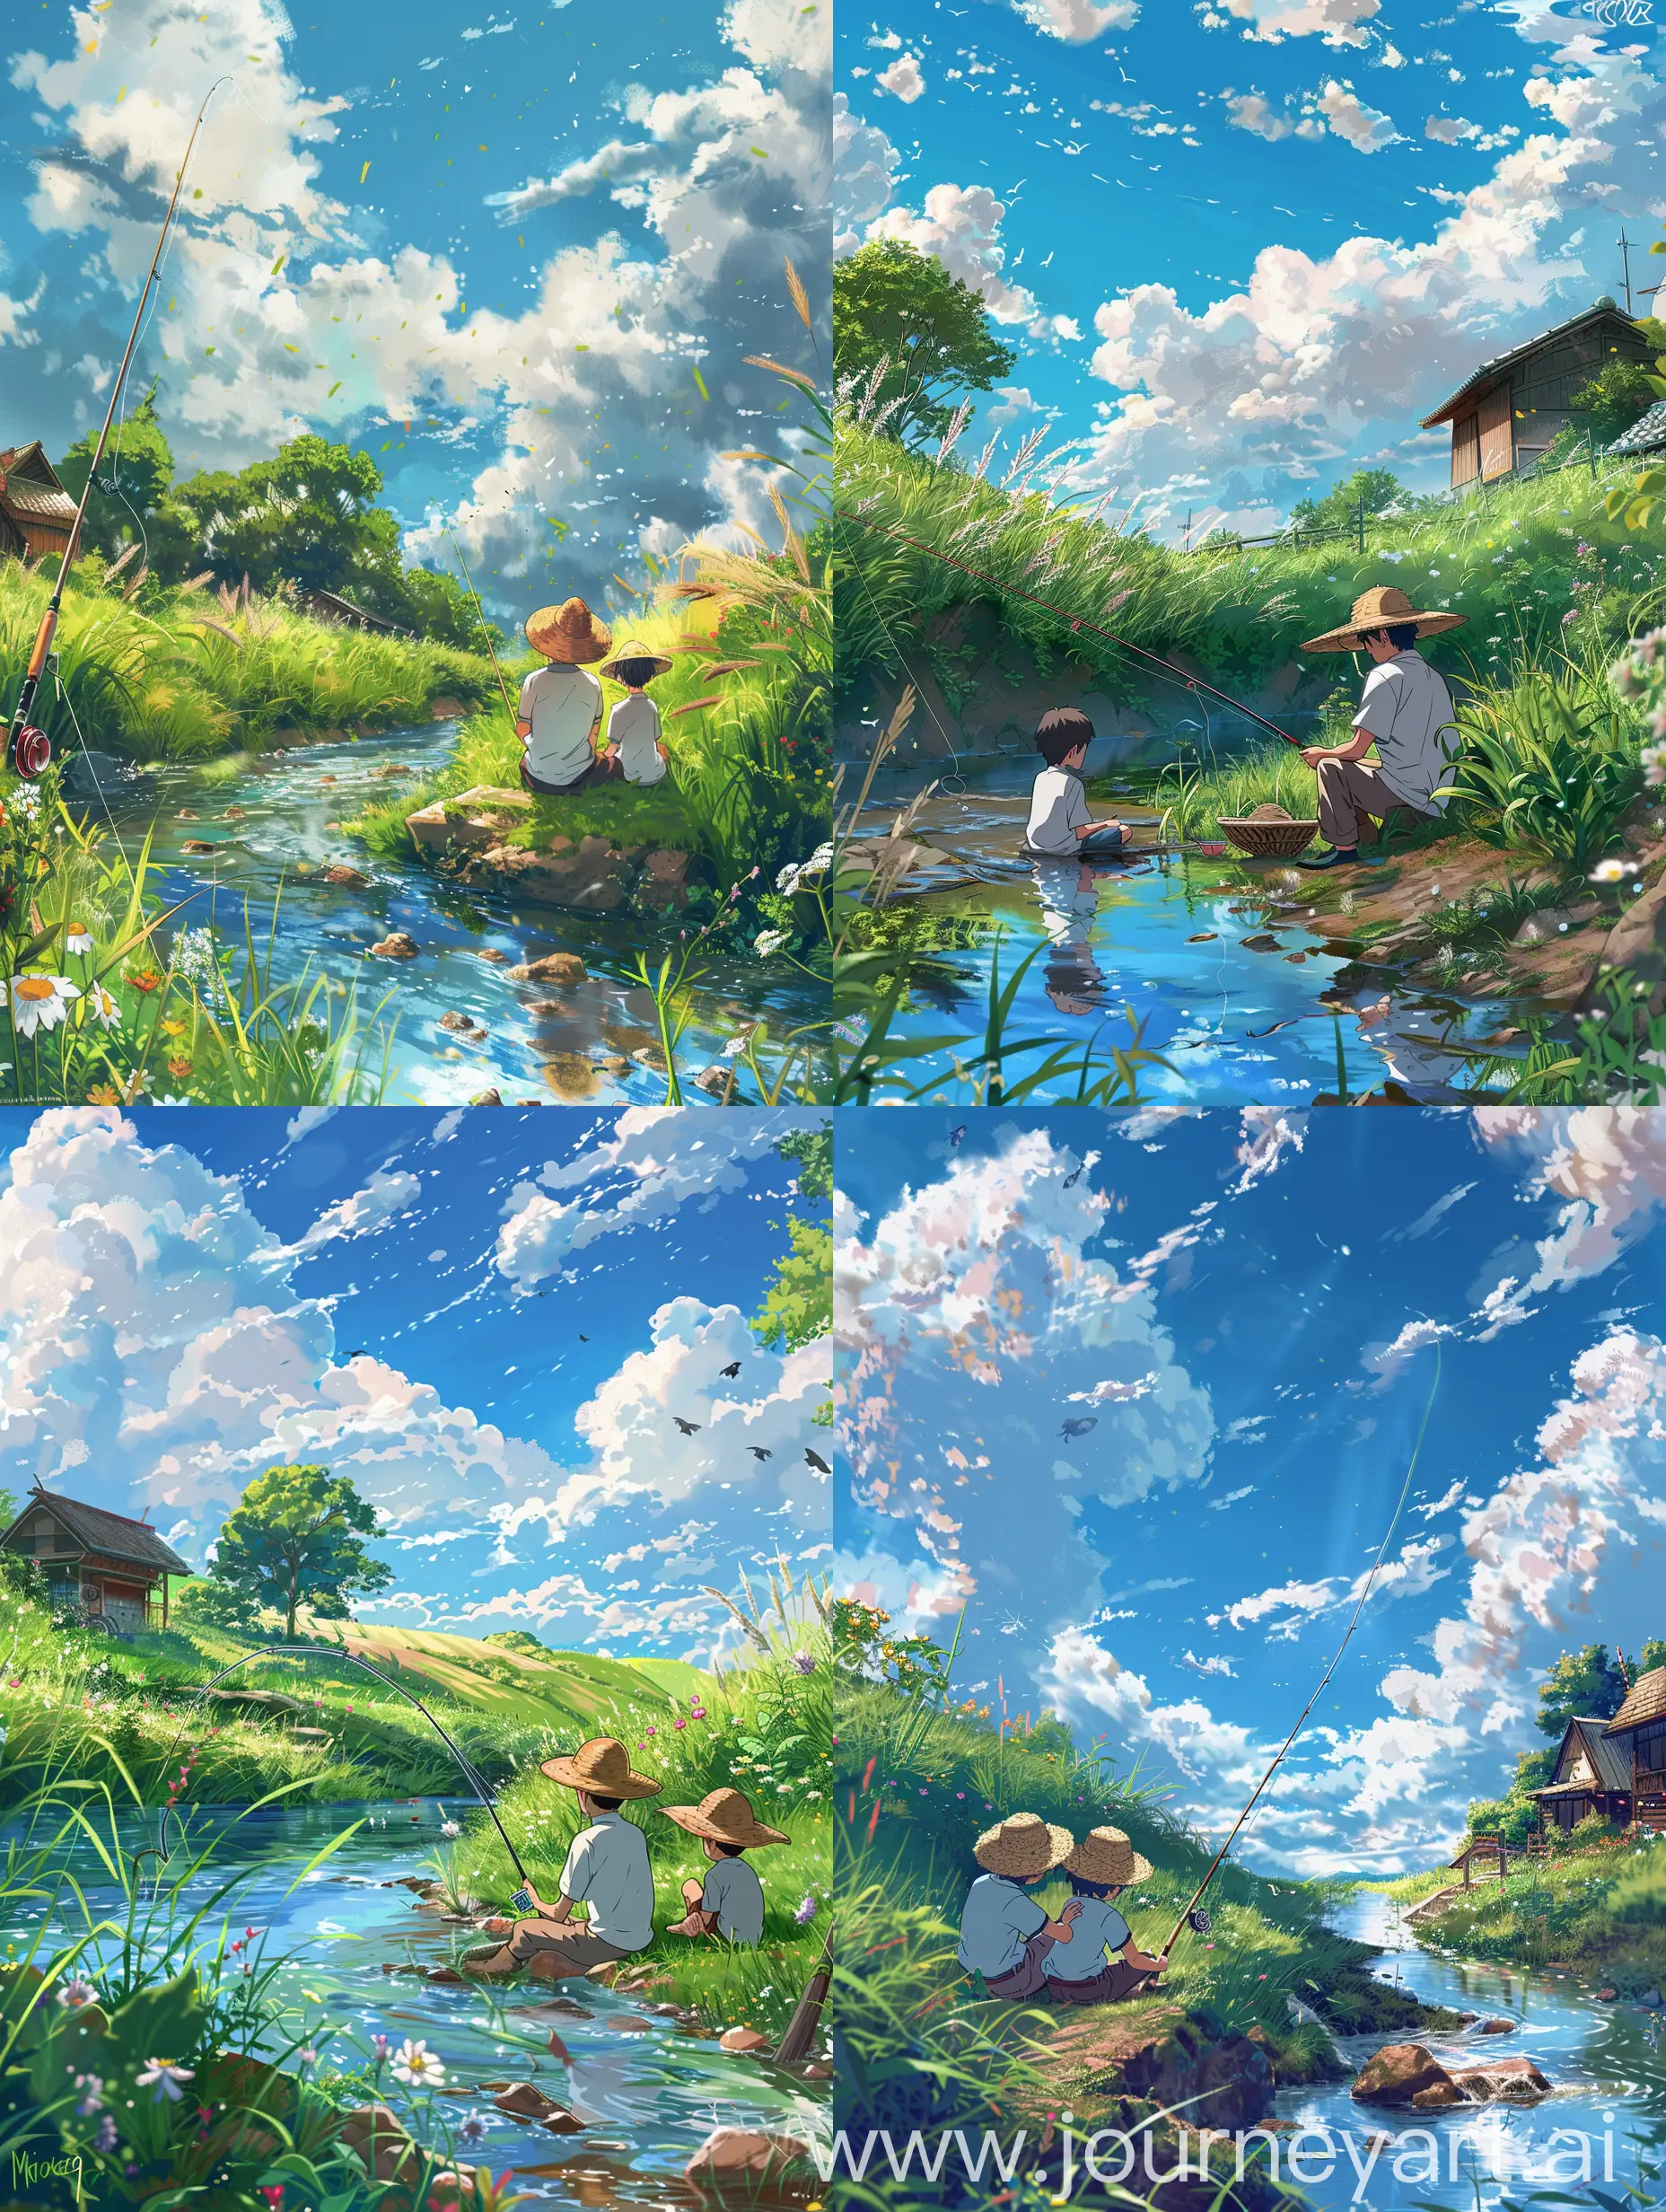 Beautiful anime style,Makoto Shinkai style,one boy with his father sitting near a small river and fishing,they are wearing a straw hat,beautiful summers,beautiful sky with fluffy clouds,grass,a little windy,some flowers,a small house made with wood can be seen,approaching the perfection (peaceful vibes) 